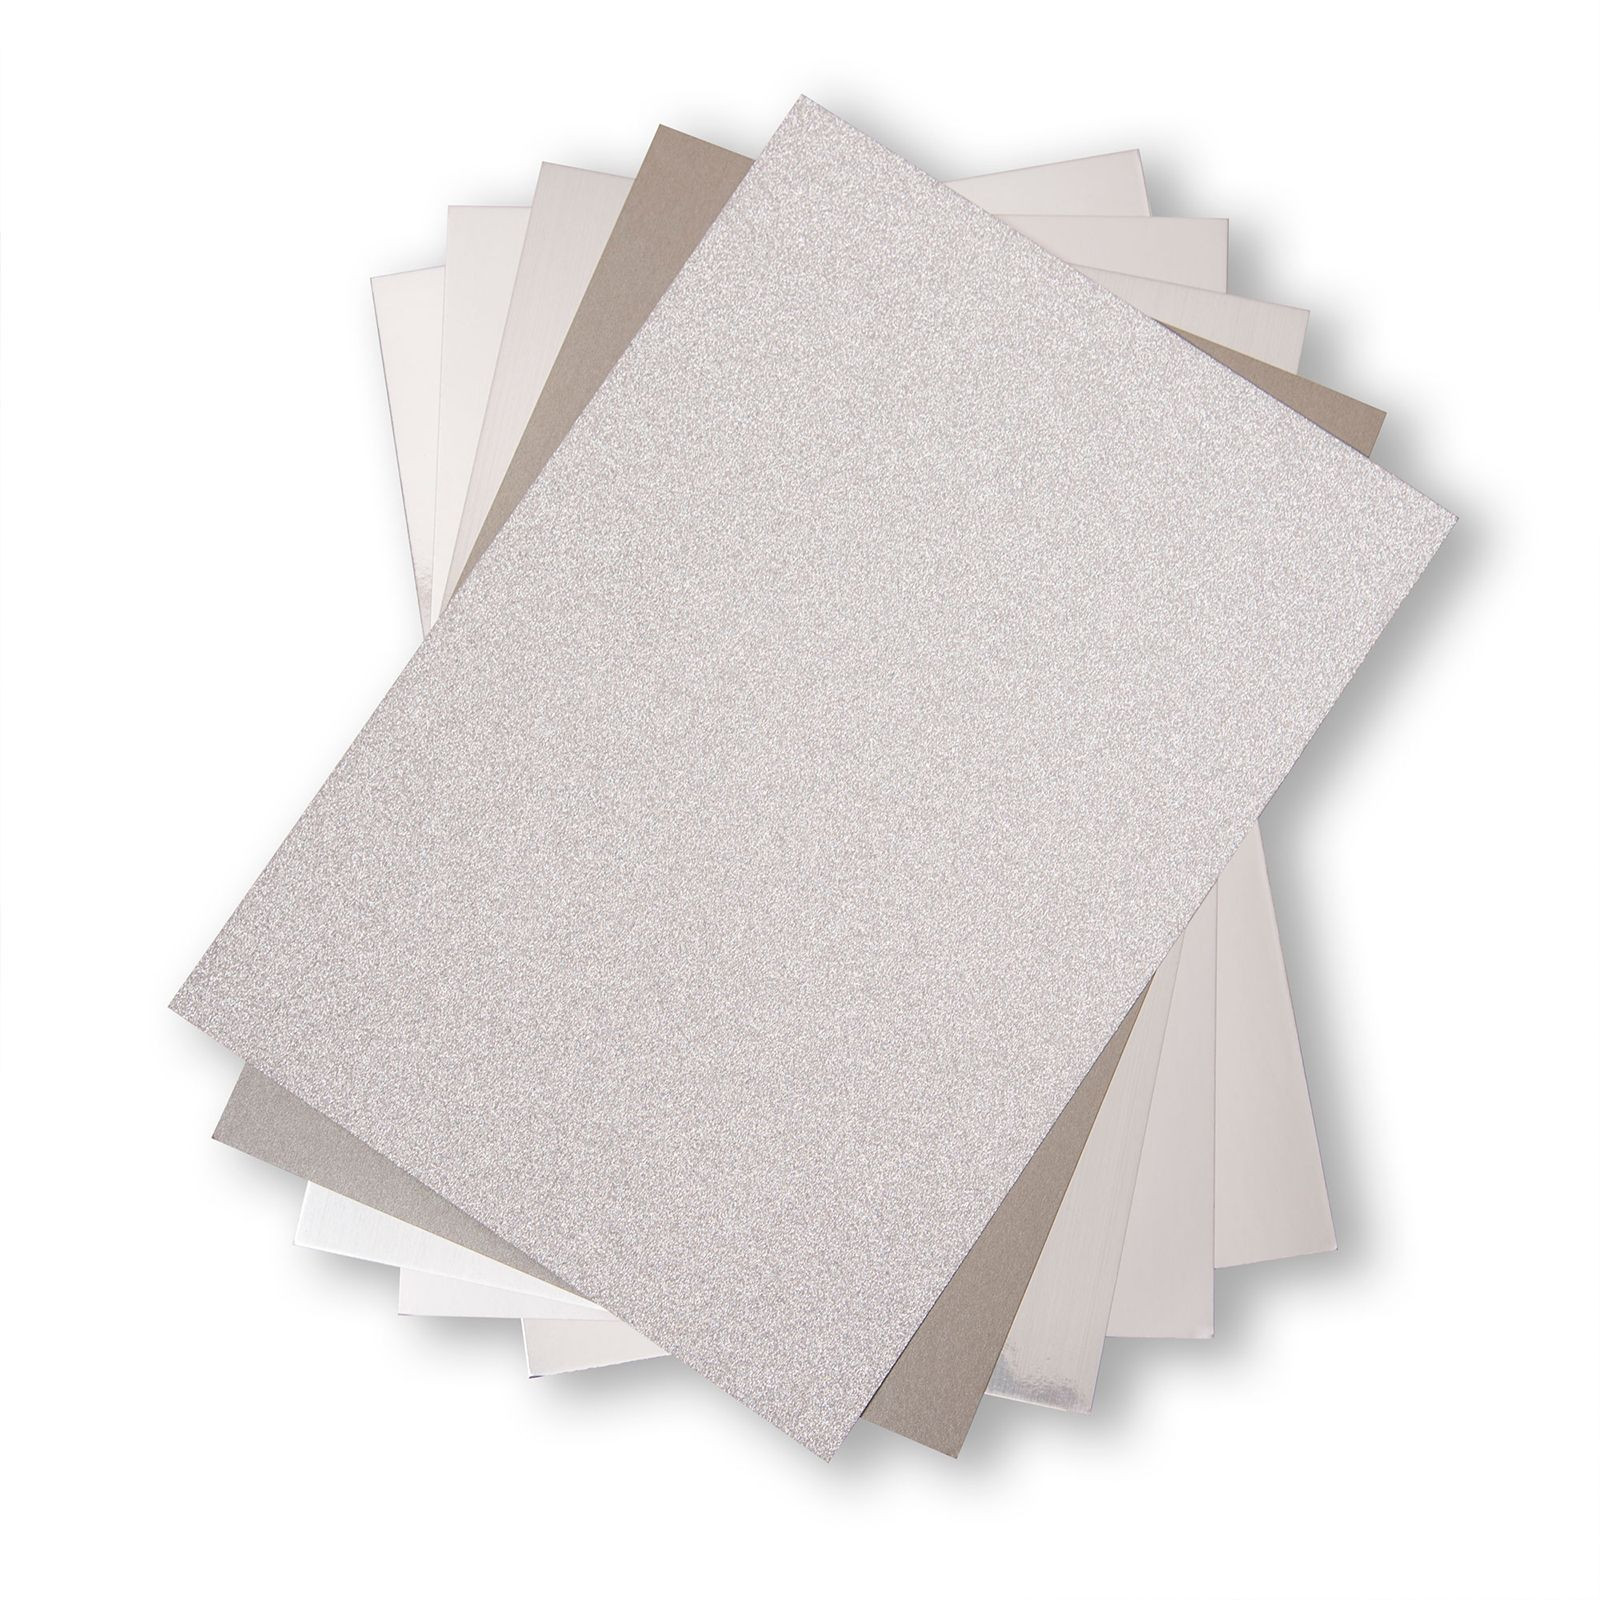 Sizzix • Surfacez Opulent Cardstock A4 Silver 50 Sheets